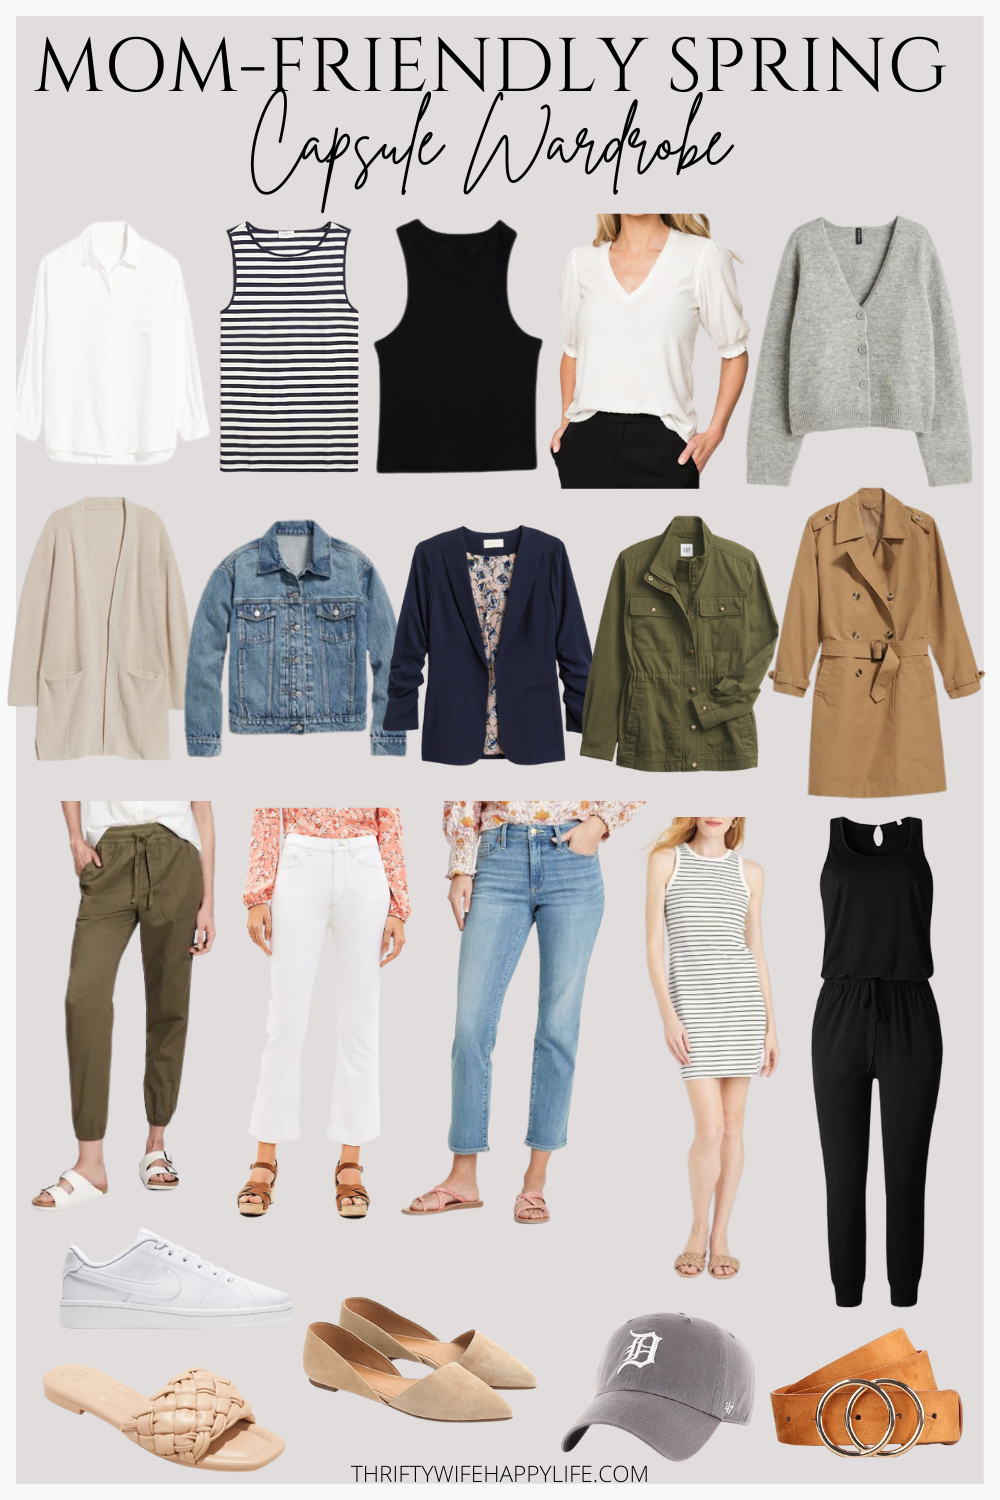 https://thriftywifehappylife.com/wp-content/uploads/2023/03/Spring-Capsule-Wardrobe.png